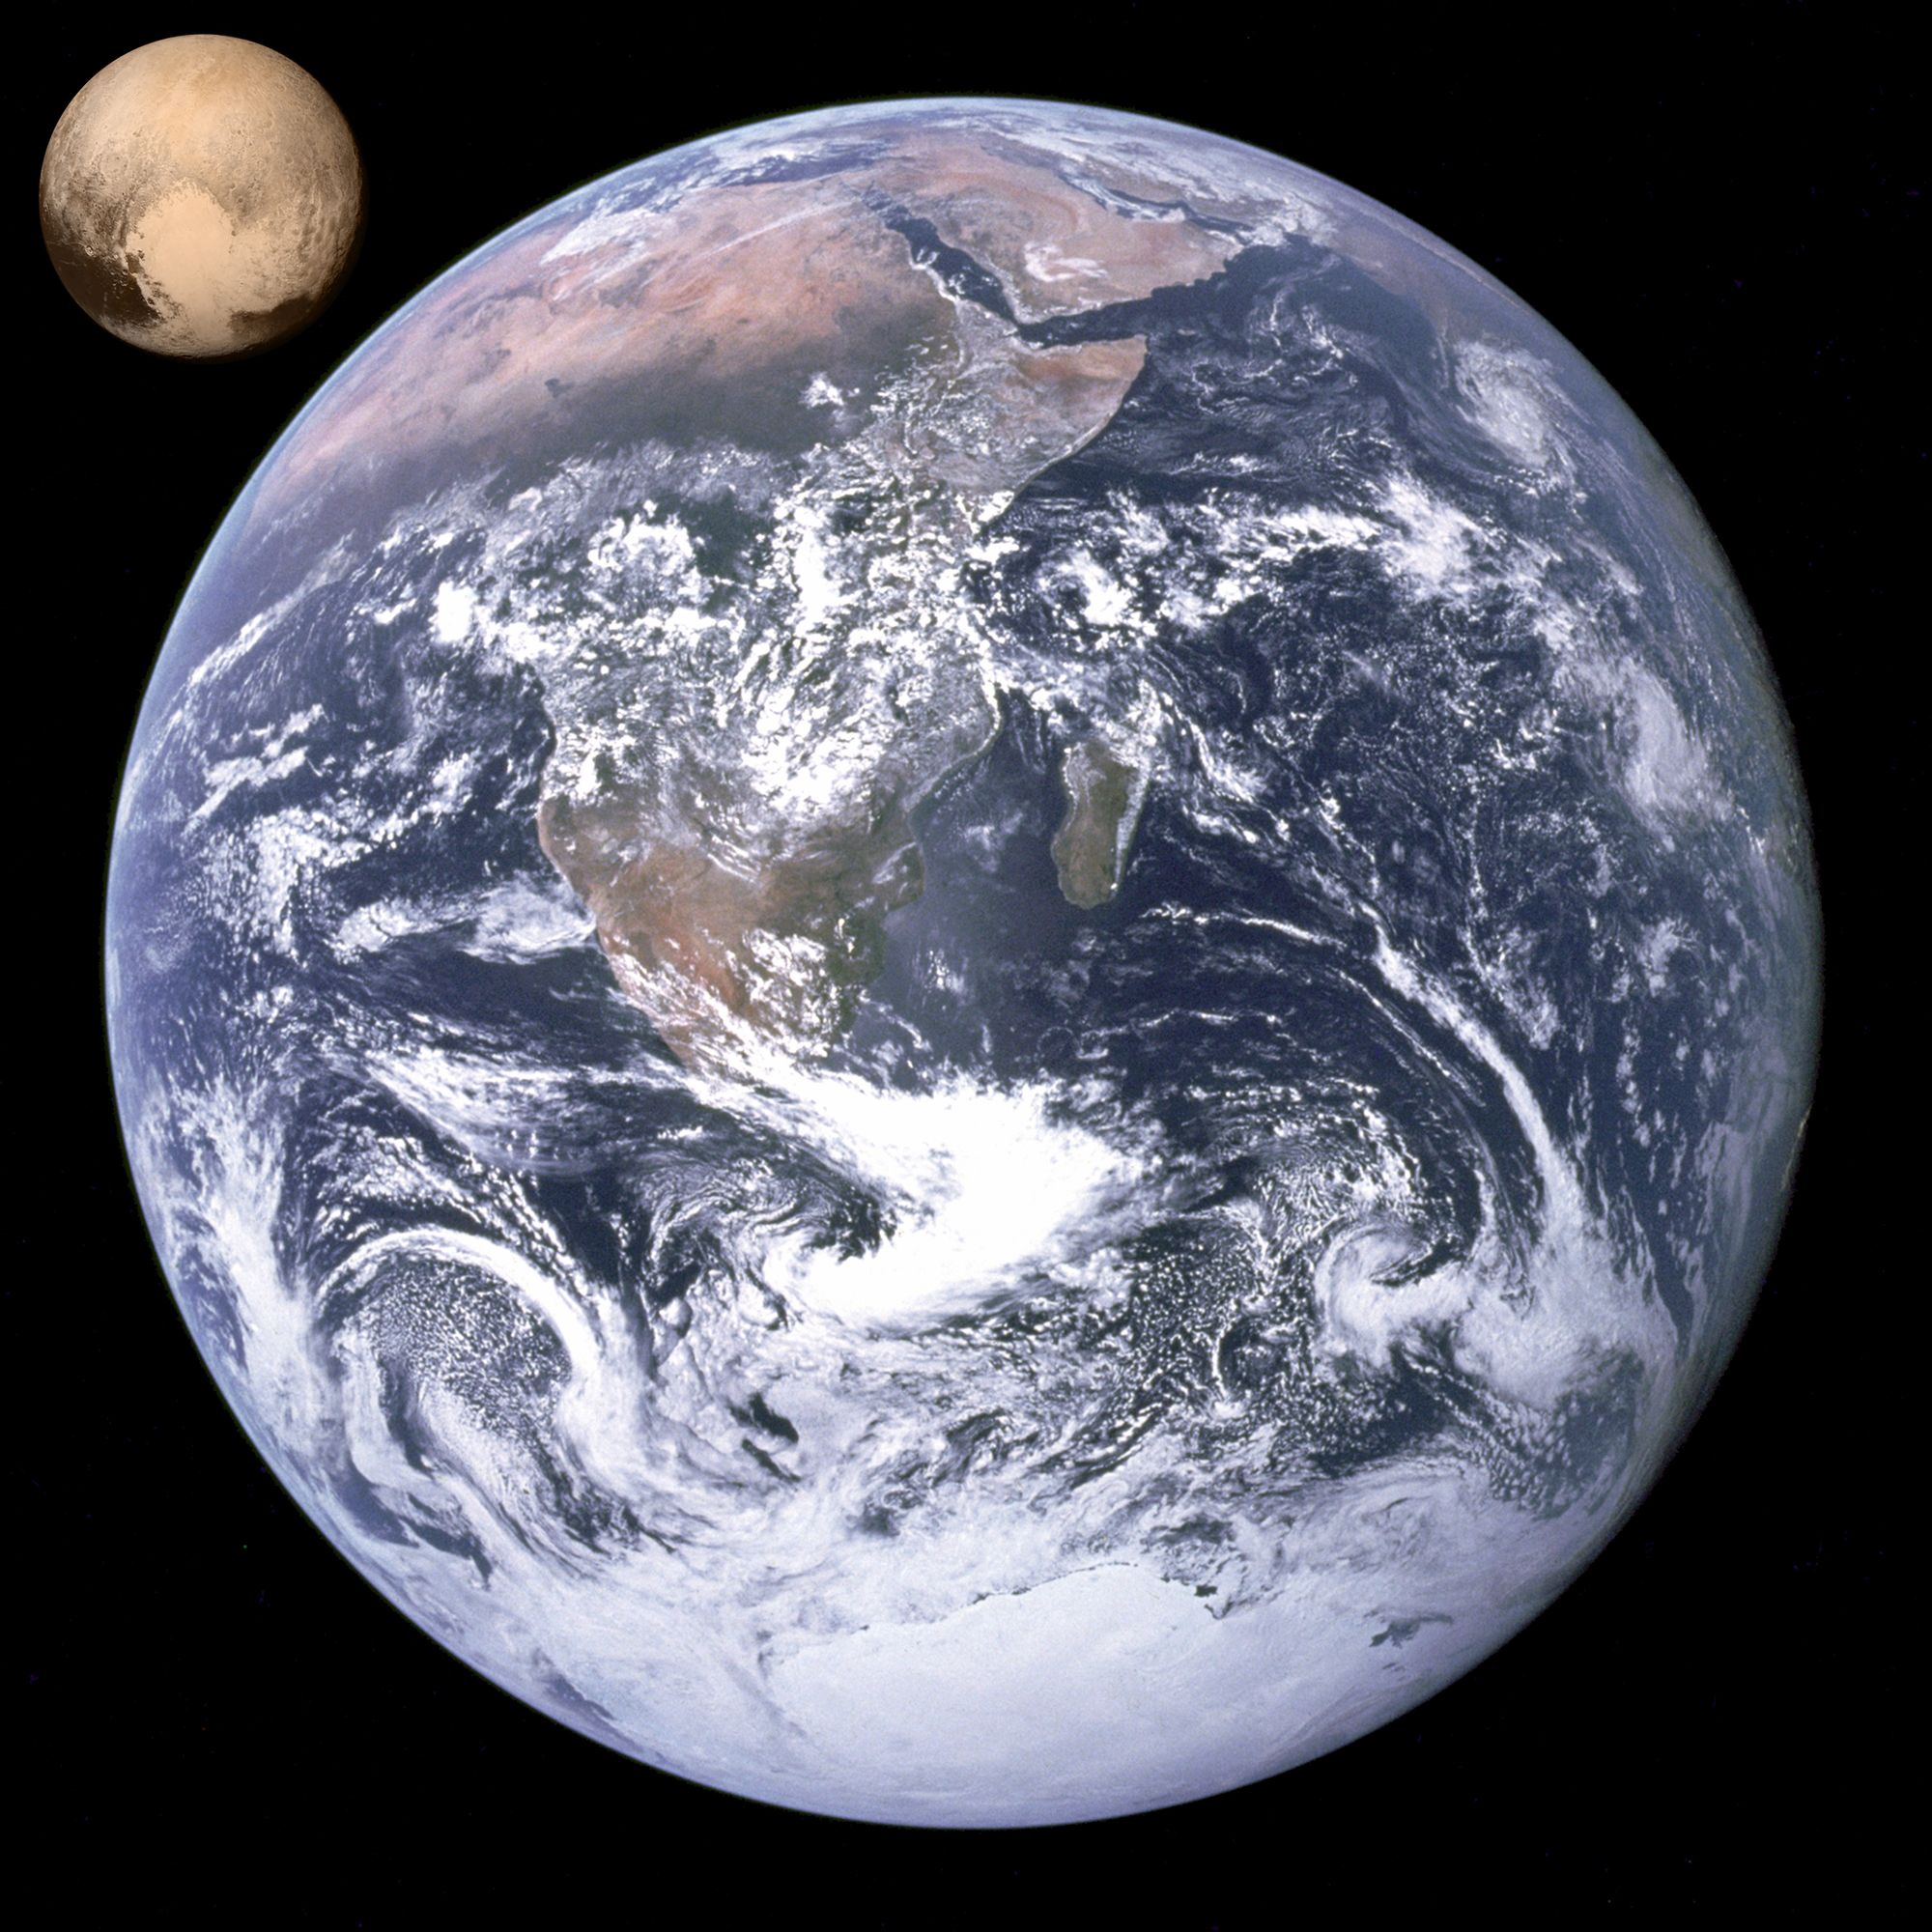 Rough comparison of the sizes of Earth and Pluto.